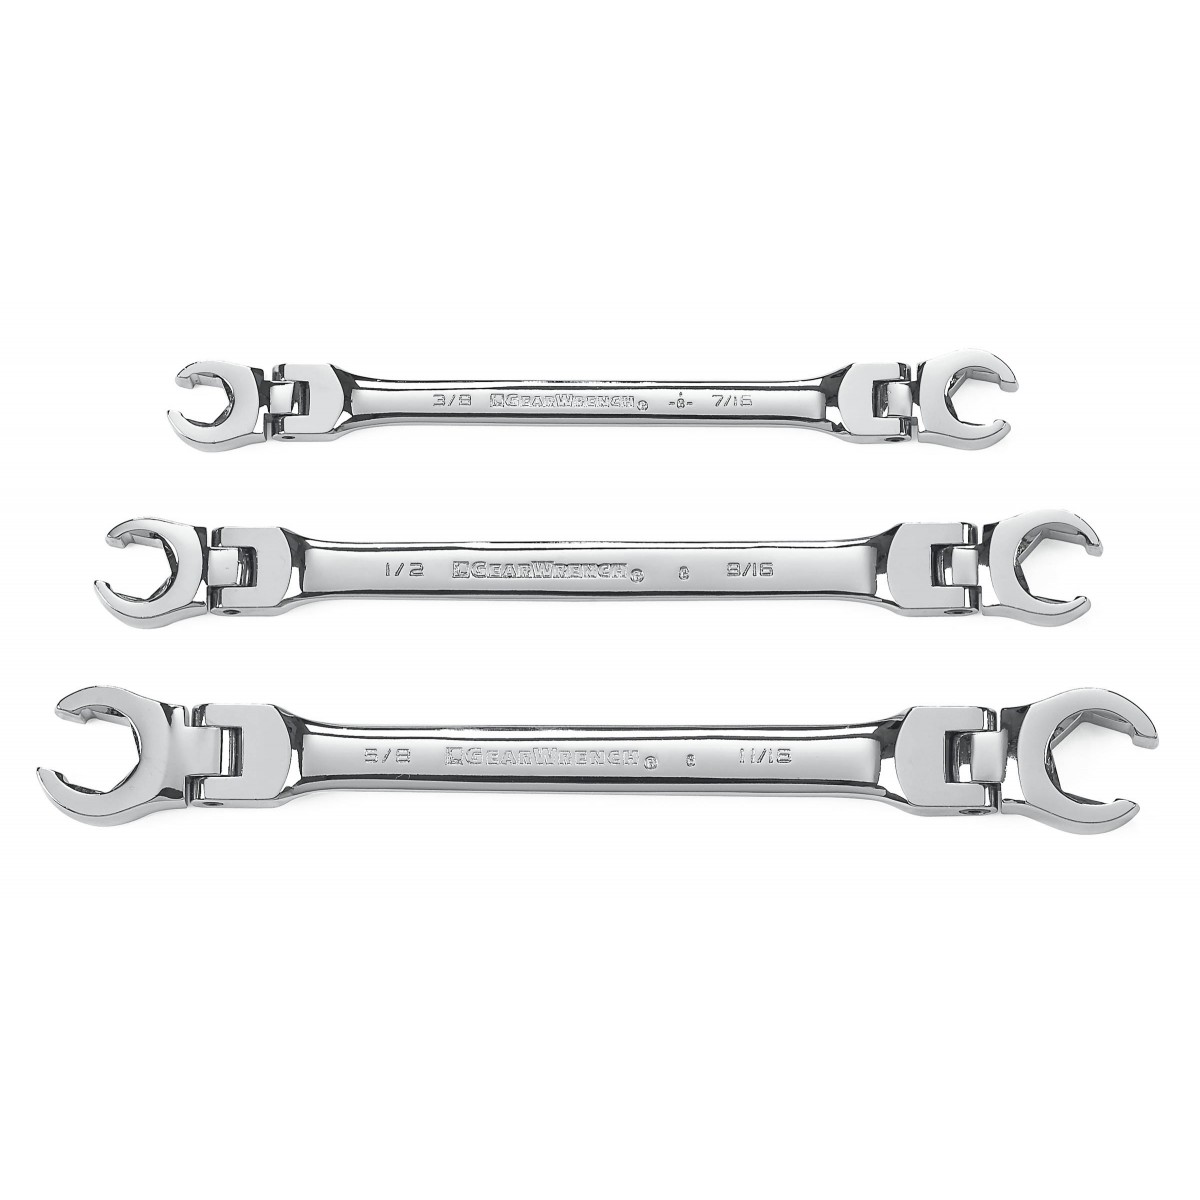 GEARWRENCH 81914 3 Pc. Flex Head Flare Nut SAE Wrench Set